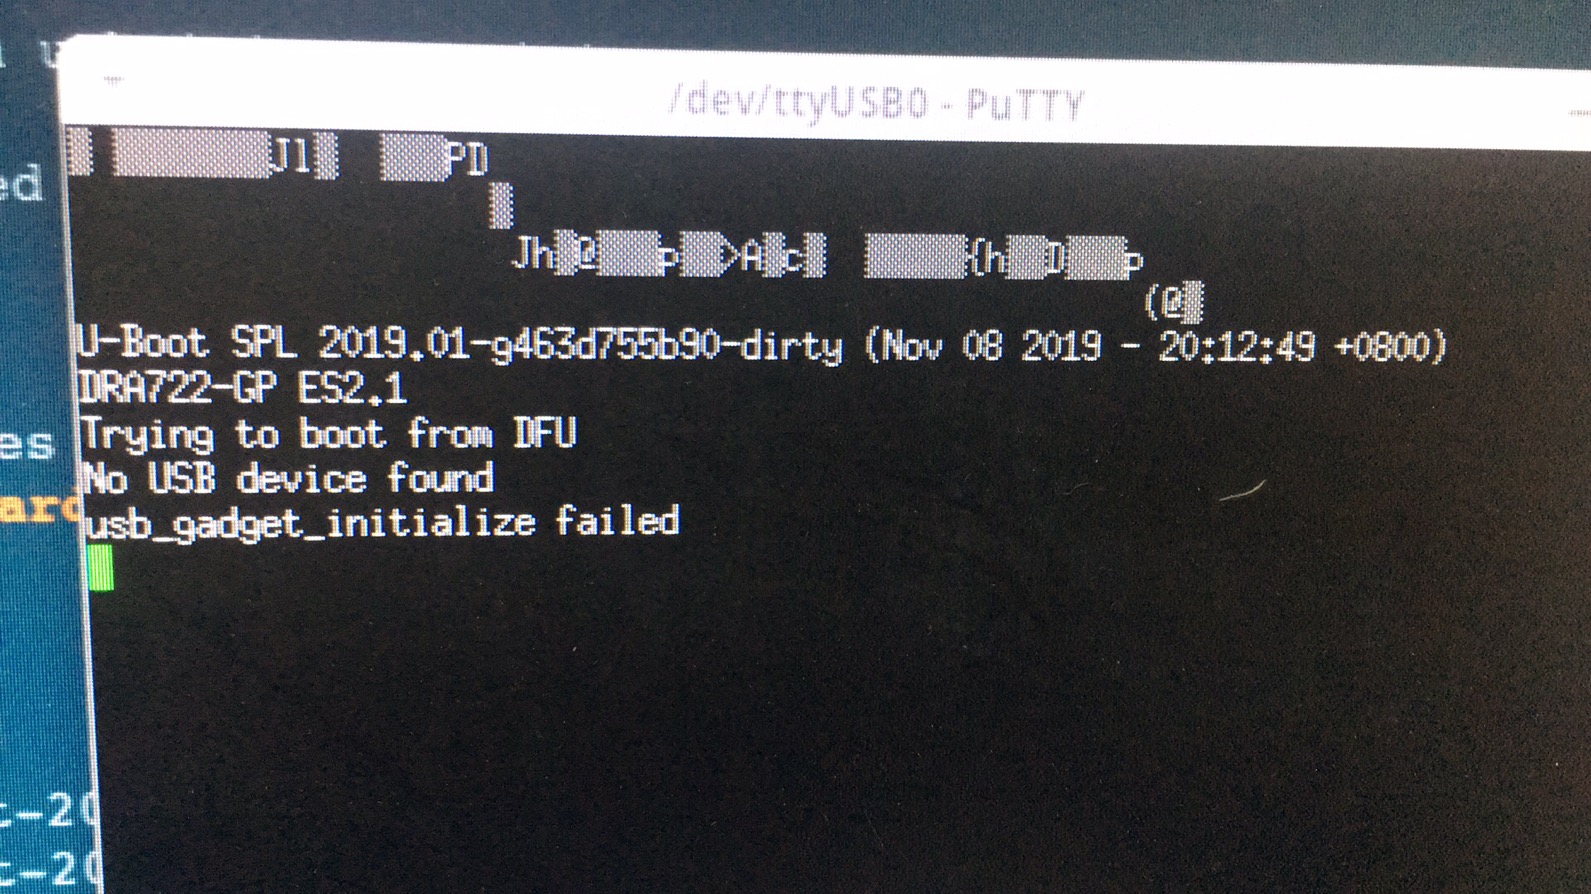 attempting boot from usb device